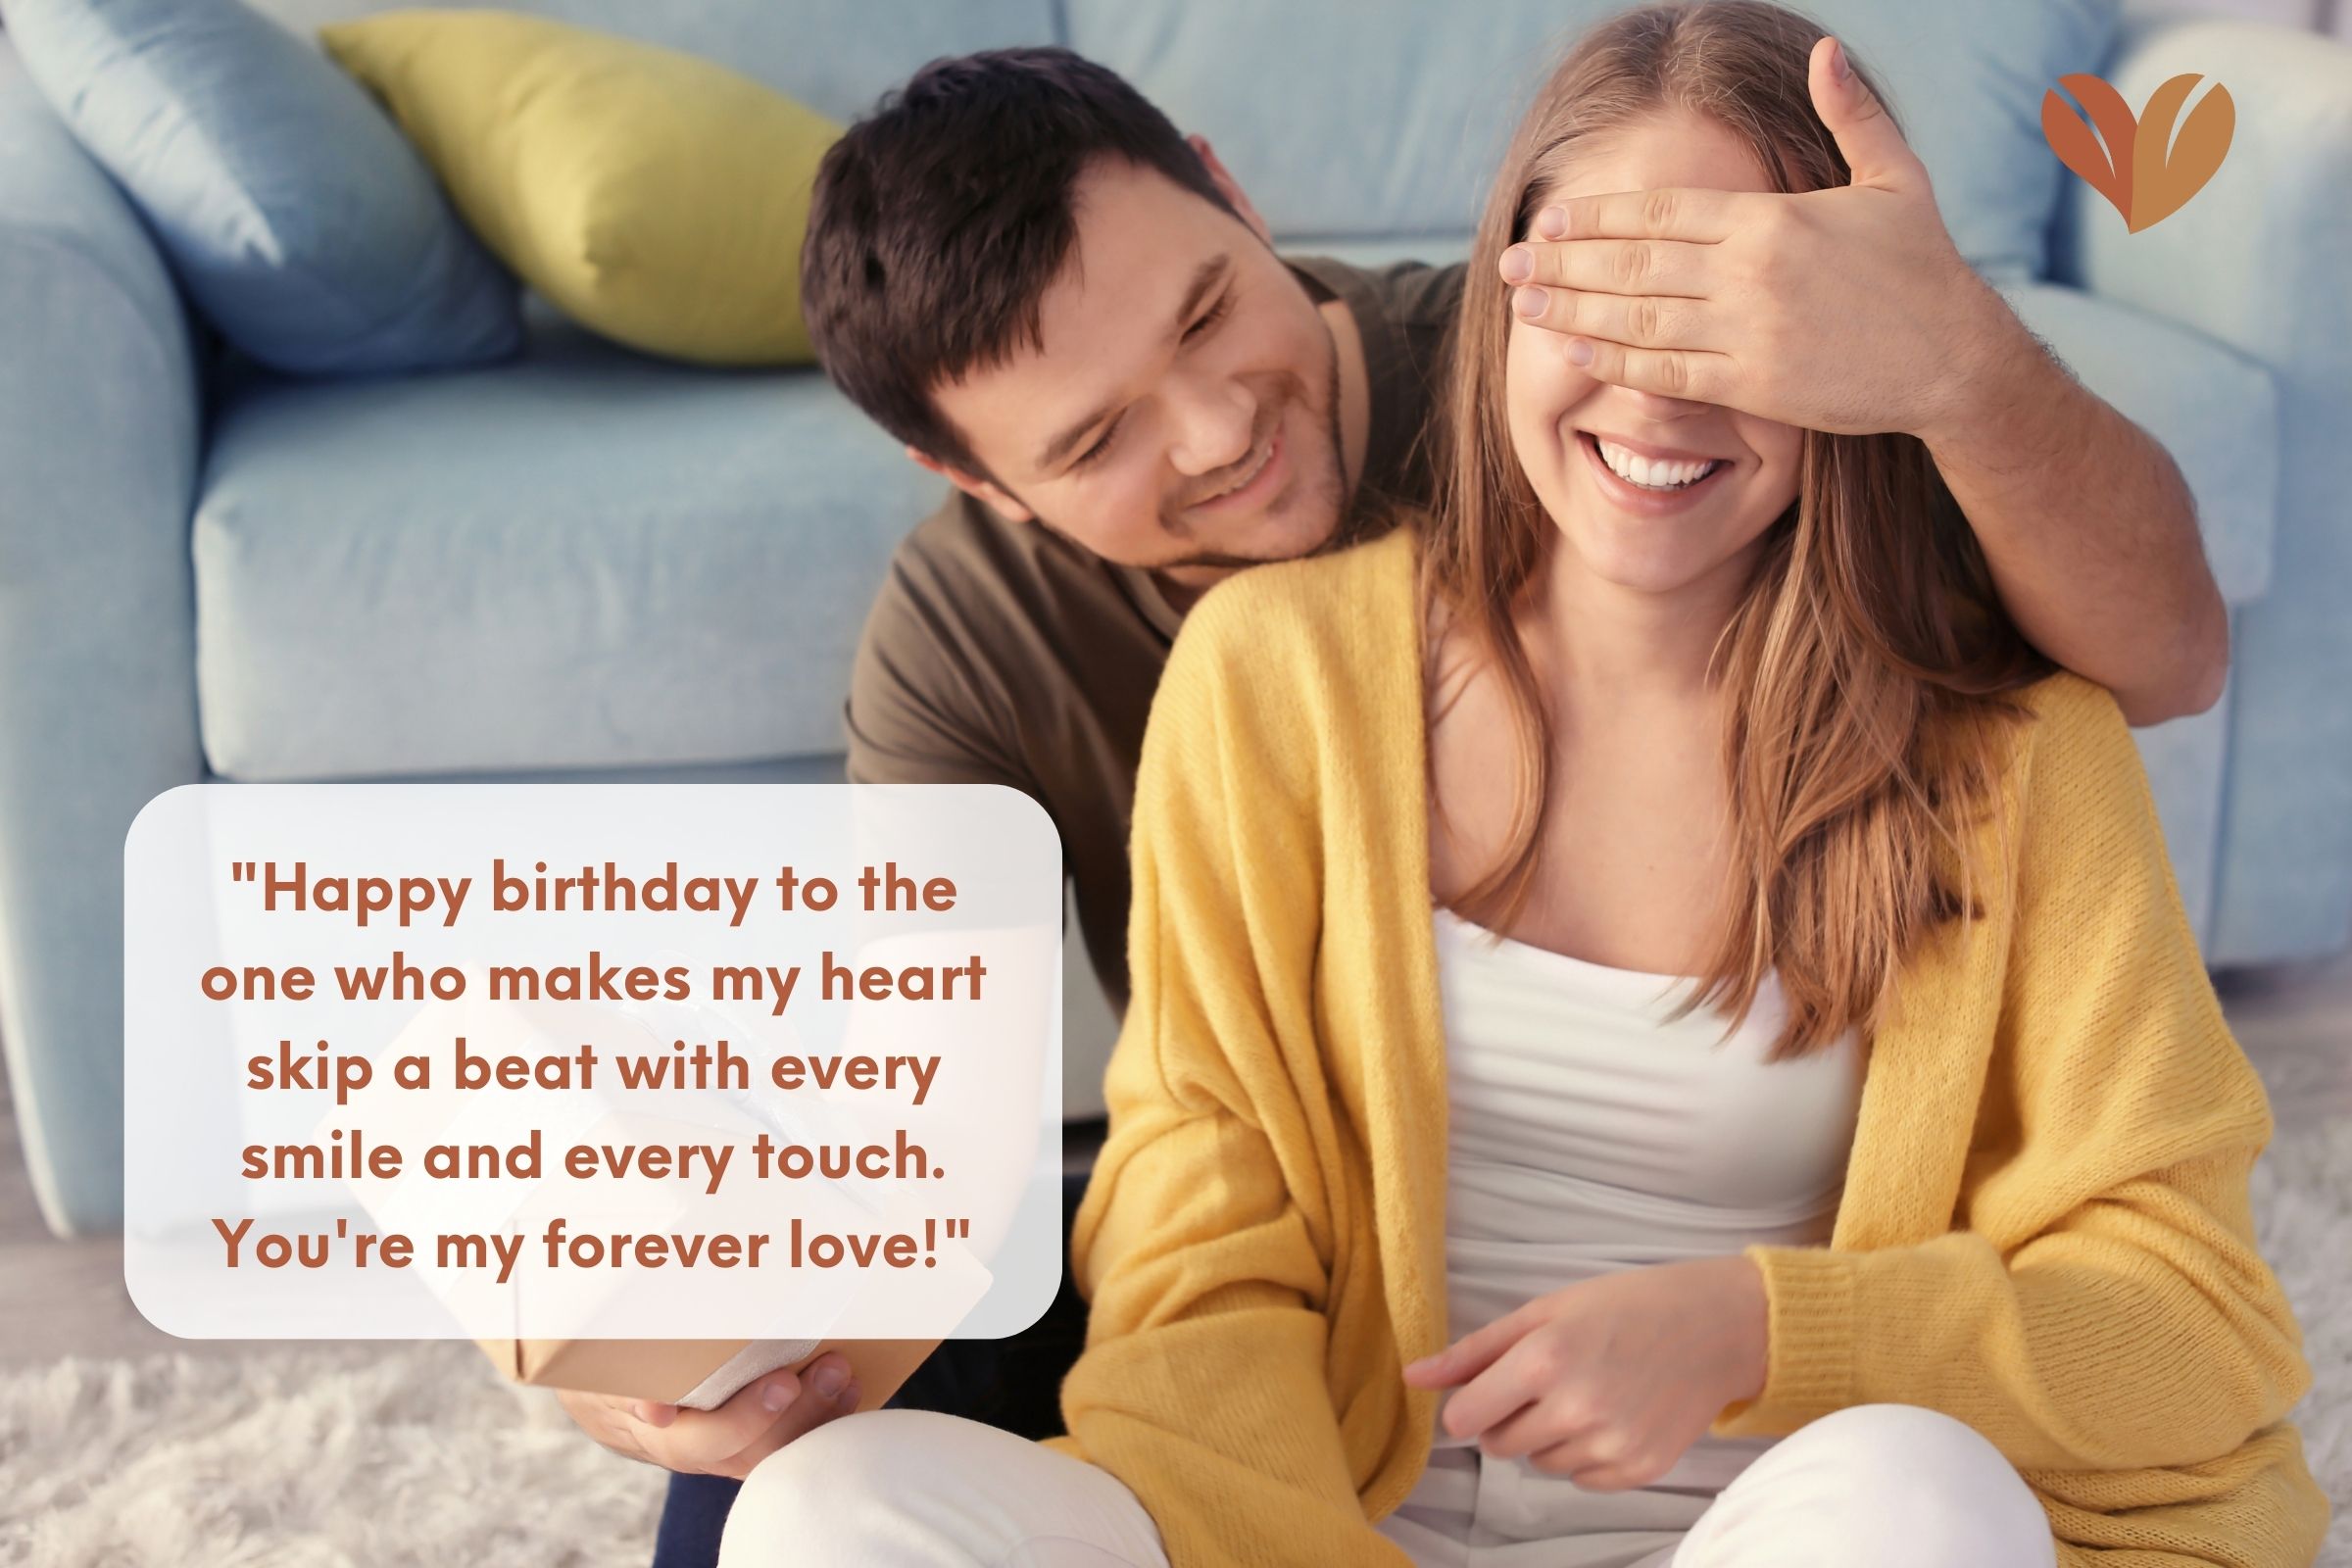 Elevate your celebrations with these heartwarming happy birthday captions